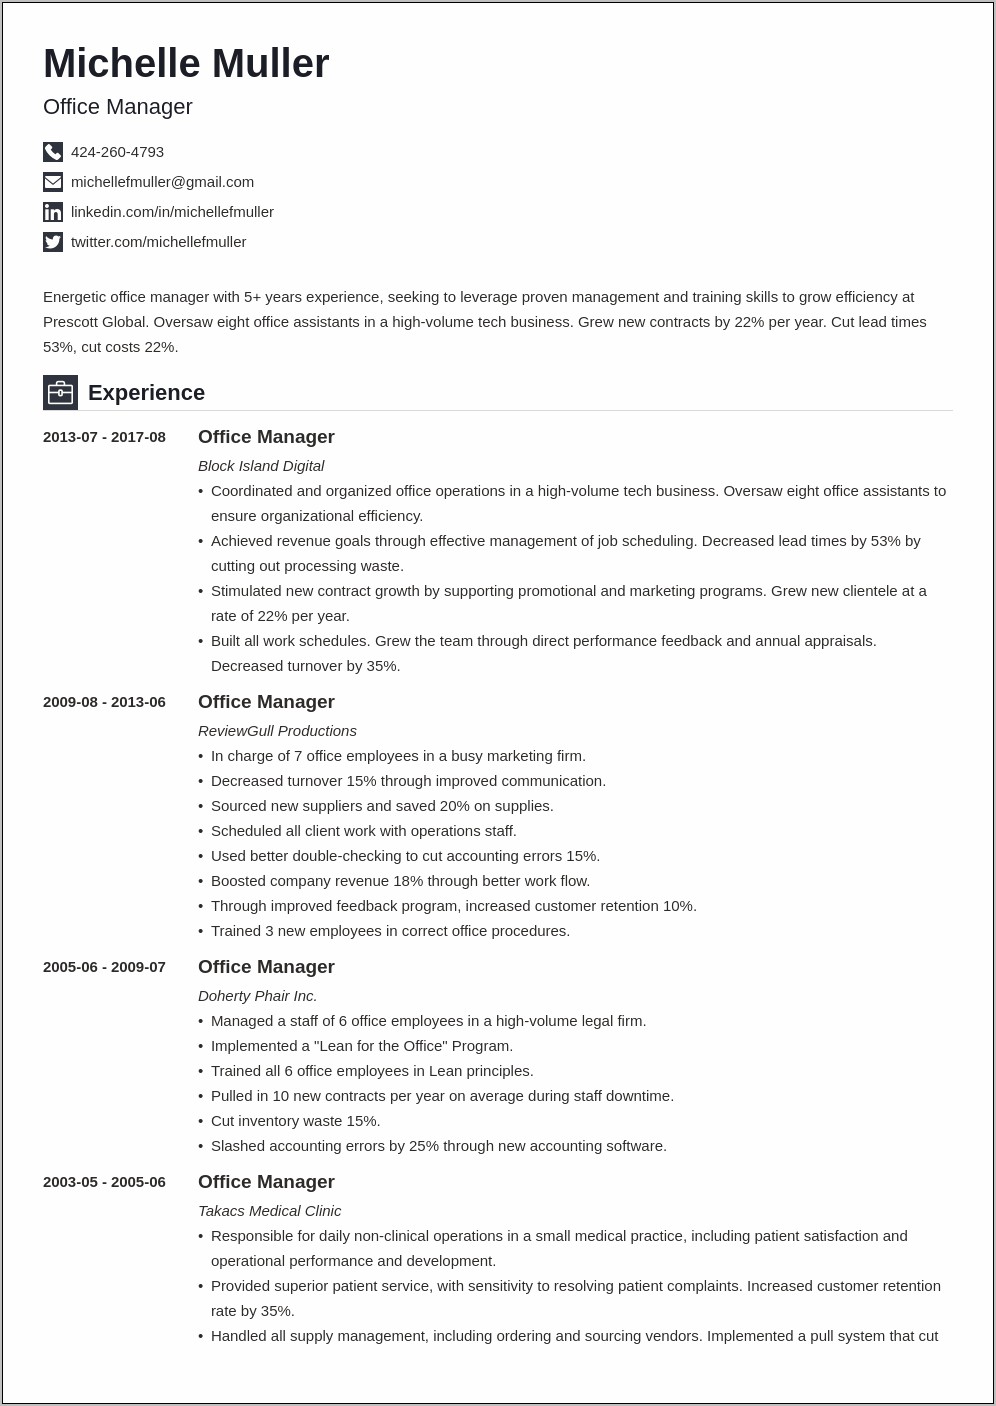 Sample Resume With Years Cut Off